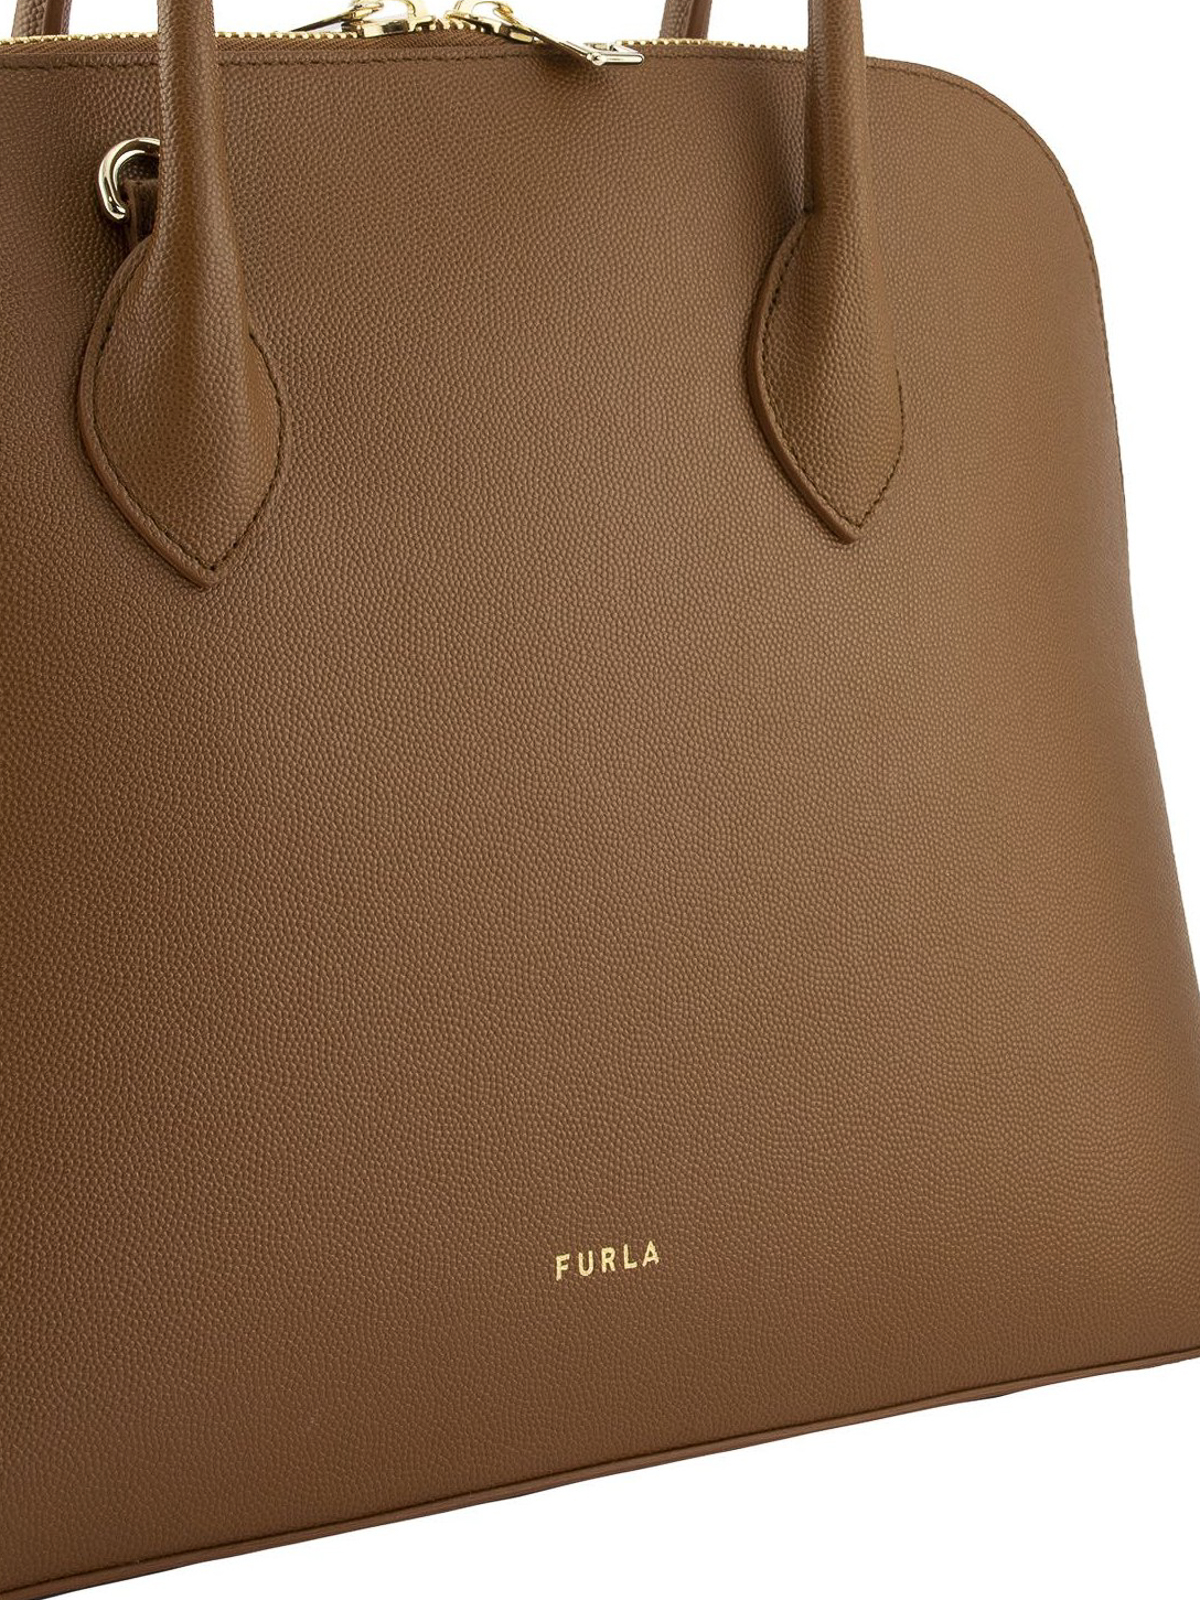 Totes bags Furla - Code Dome leather tote bag - 1055688